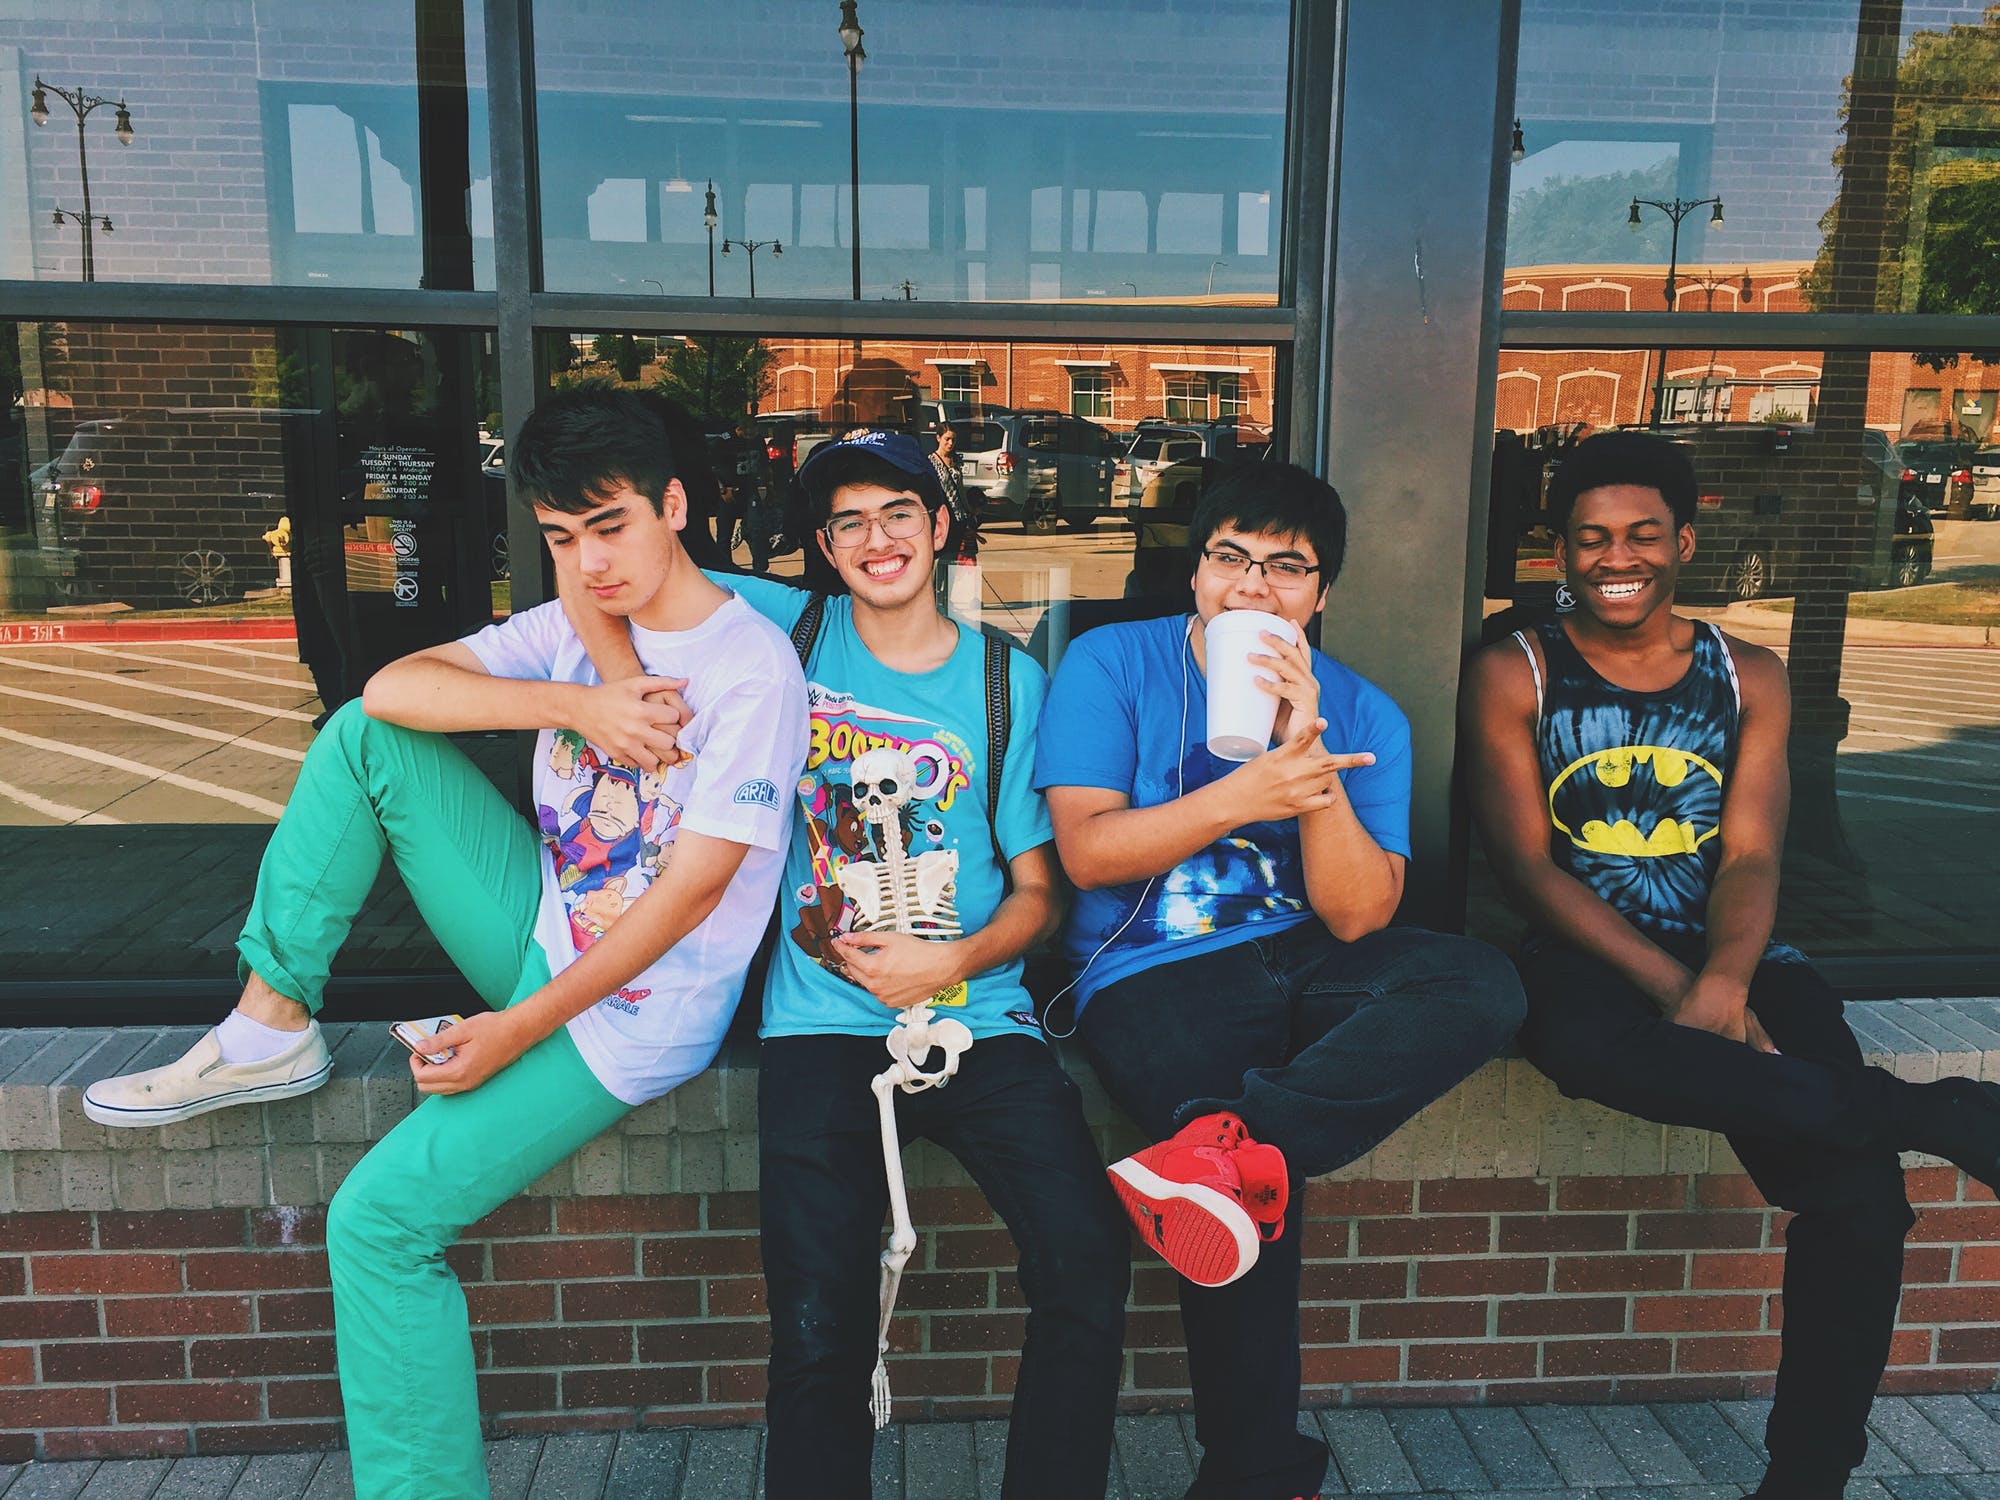 Four teen boys hanging out, outside a building.